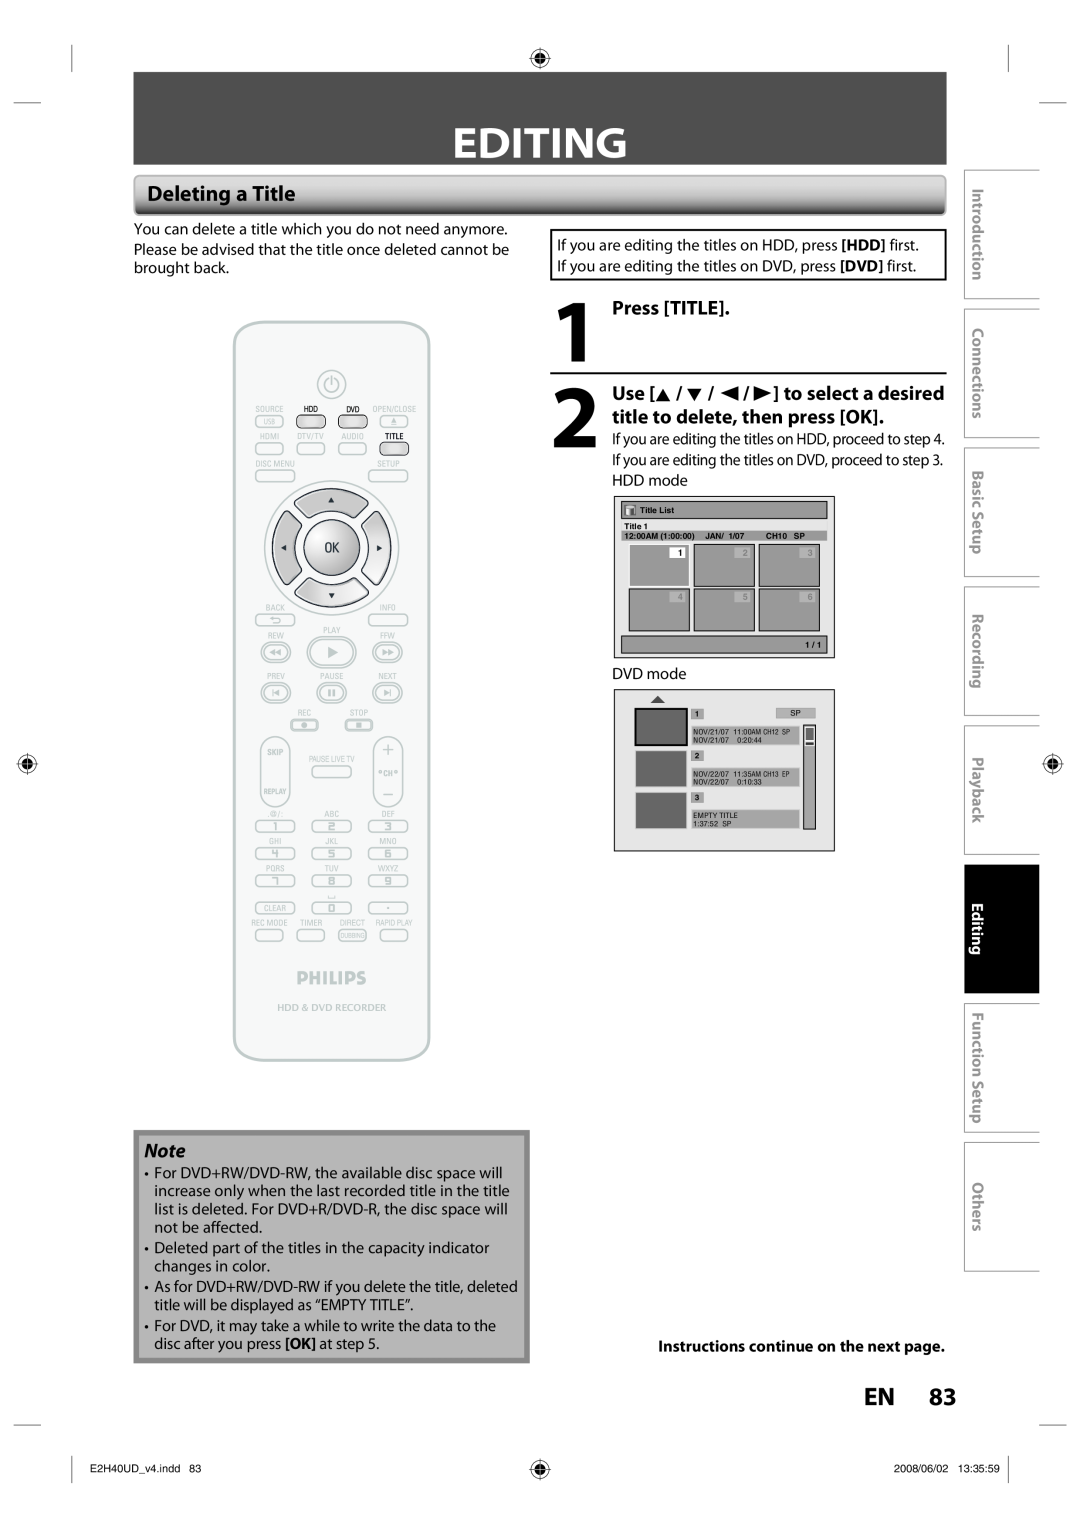 Philips DVDR3575H/37 manual Editing, Deleting a Title, Press TITLE, Instructions continue on the next page 